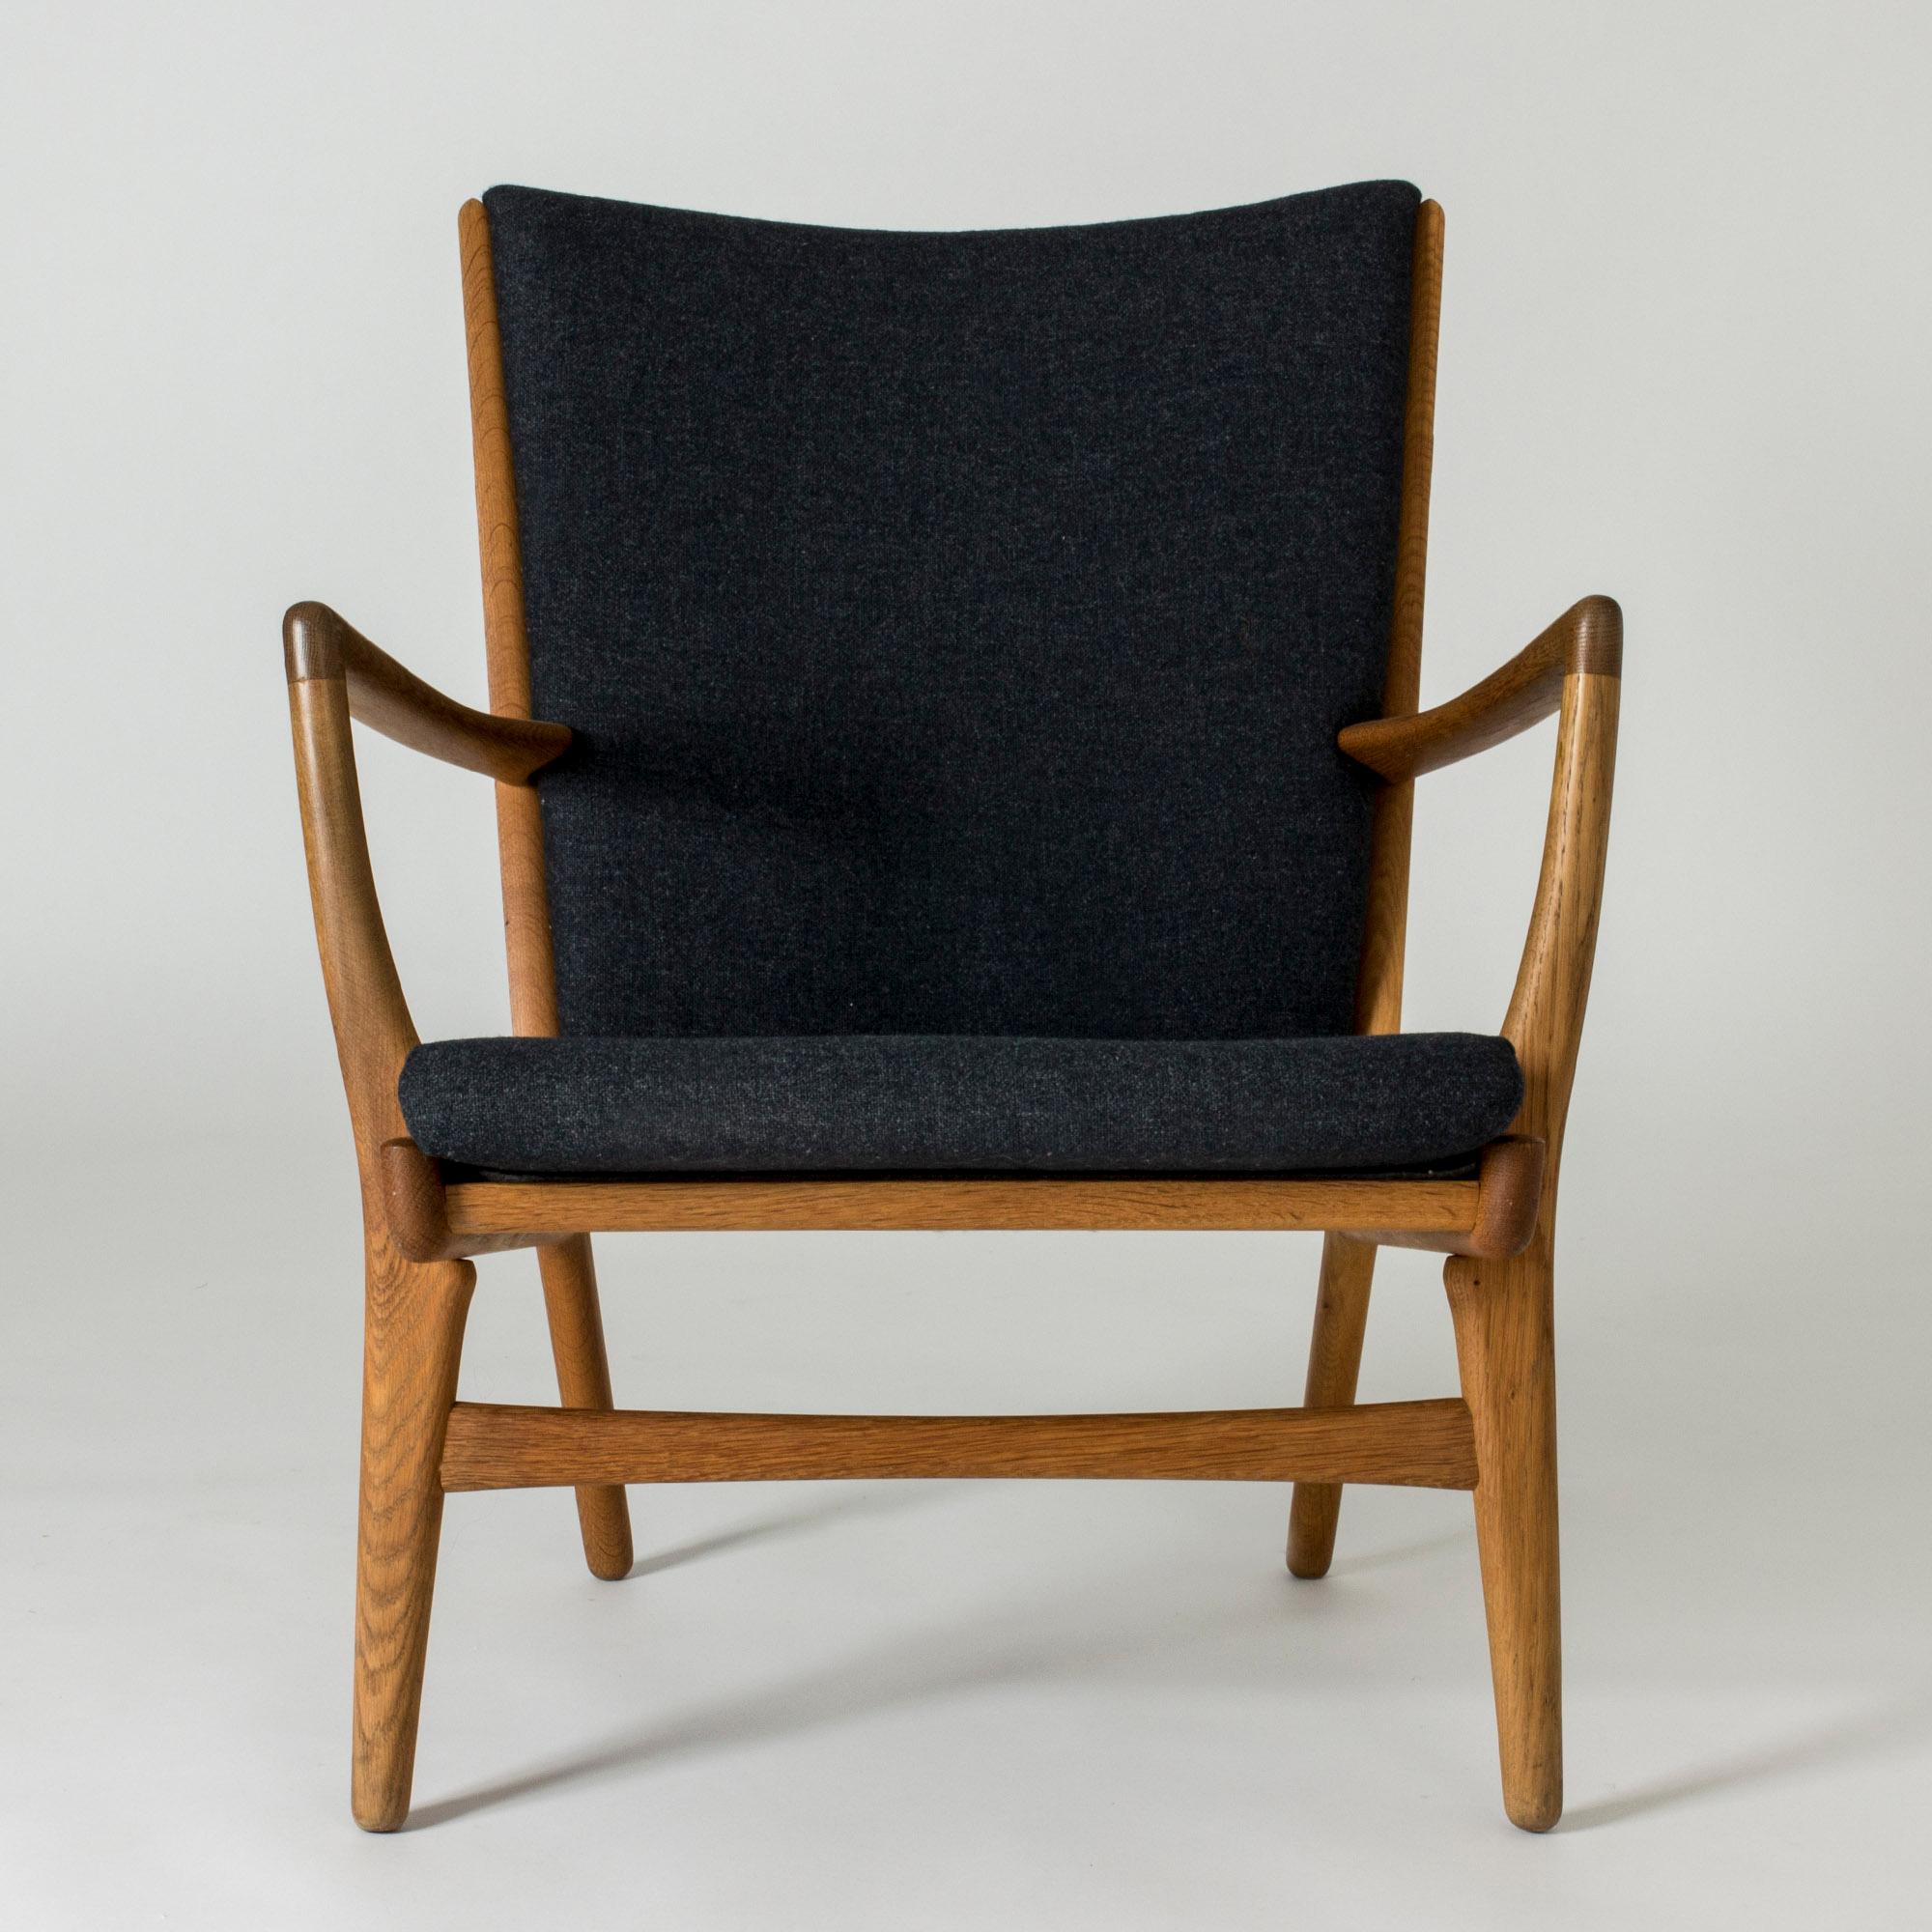 Cool “AP 16” lounge chair by Hans J. Wegner. Made from oak and upholstered with dark grey wool fabric. Bold, graphic lines.